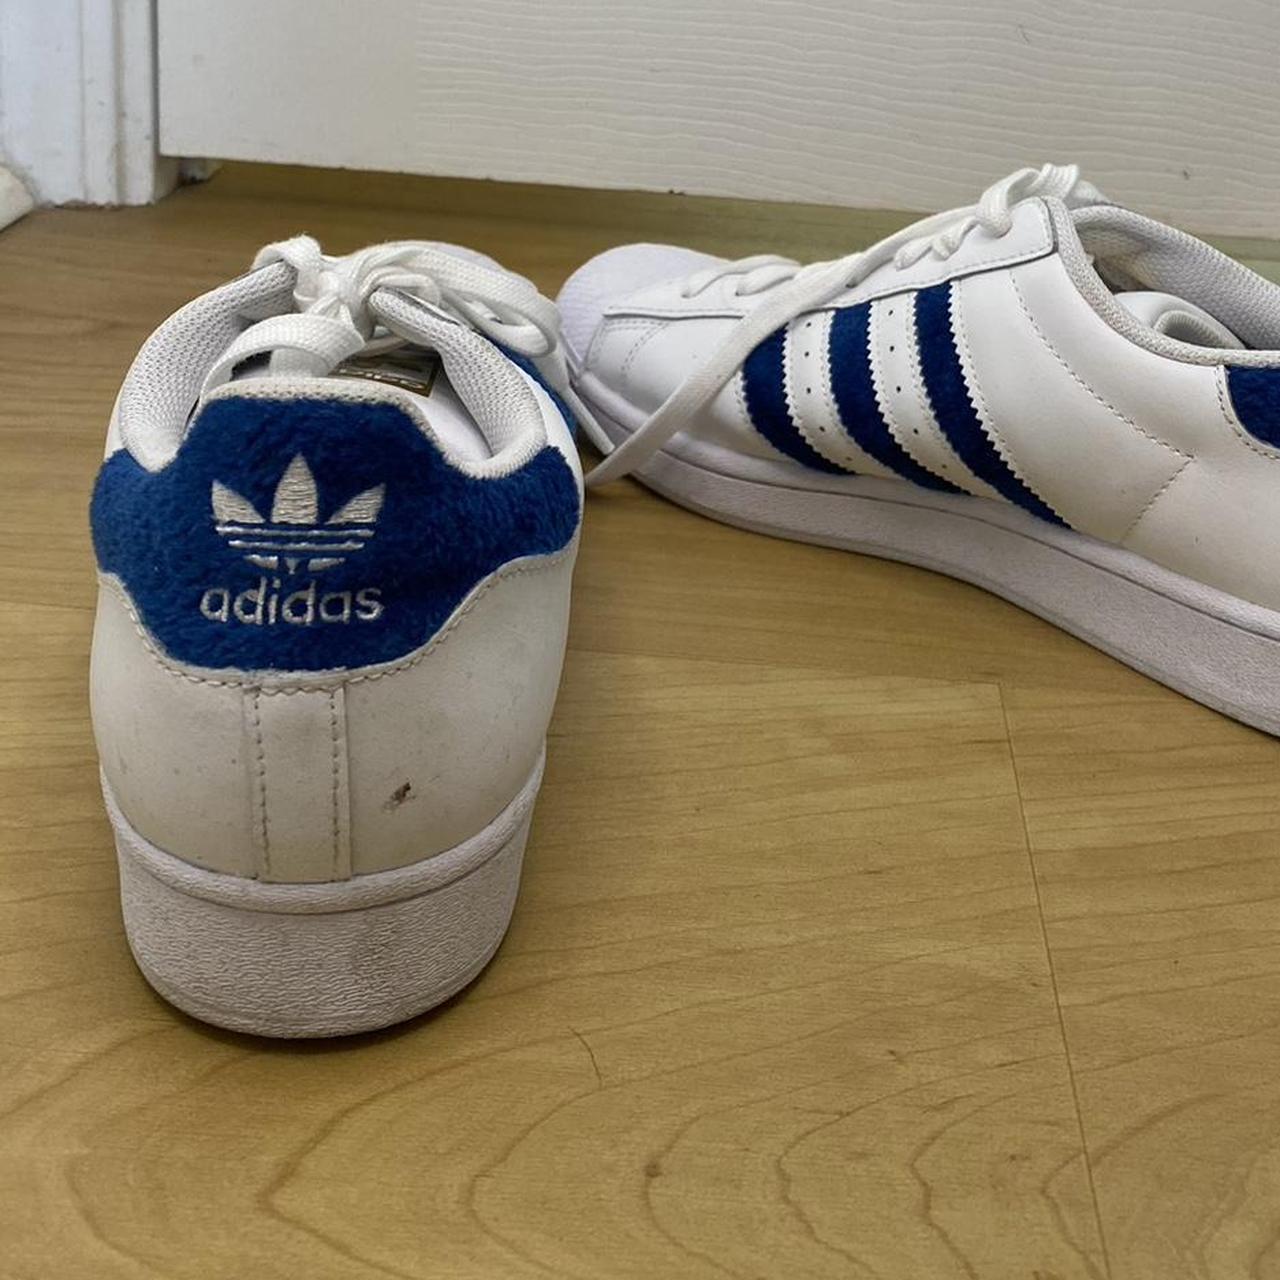 Adidas Women's White and Blue Trainers (3)